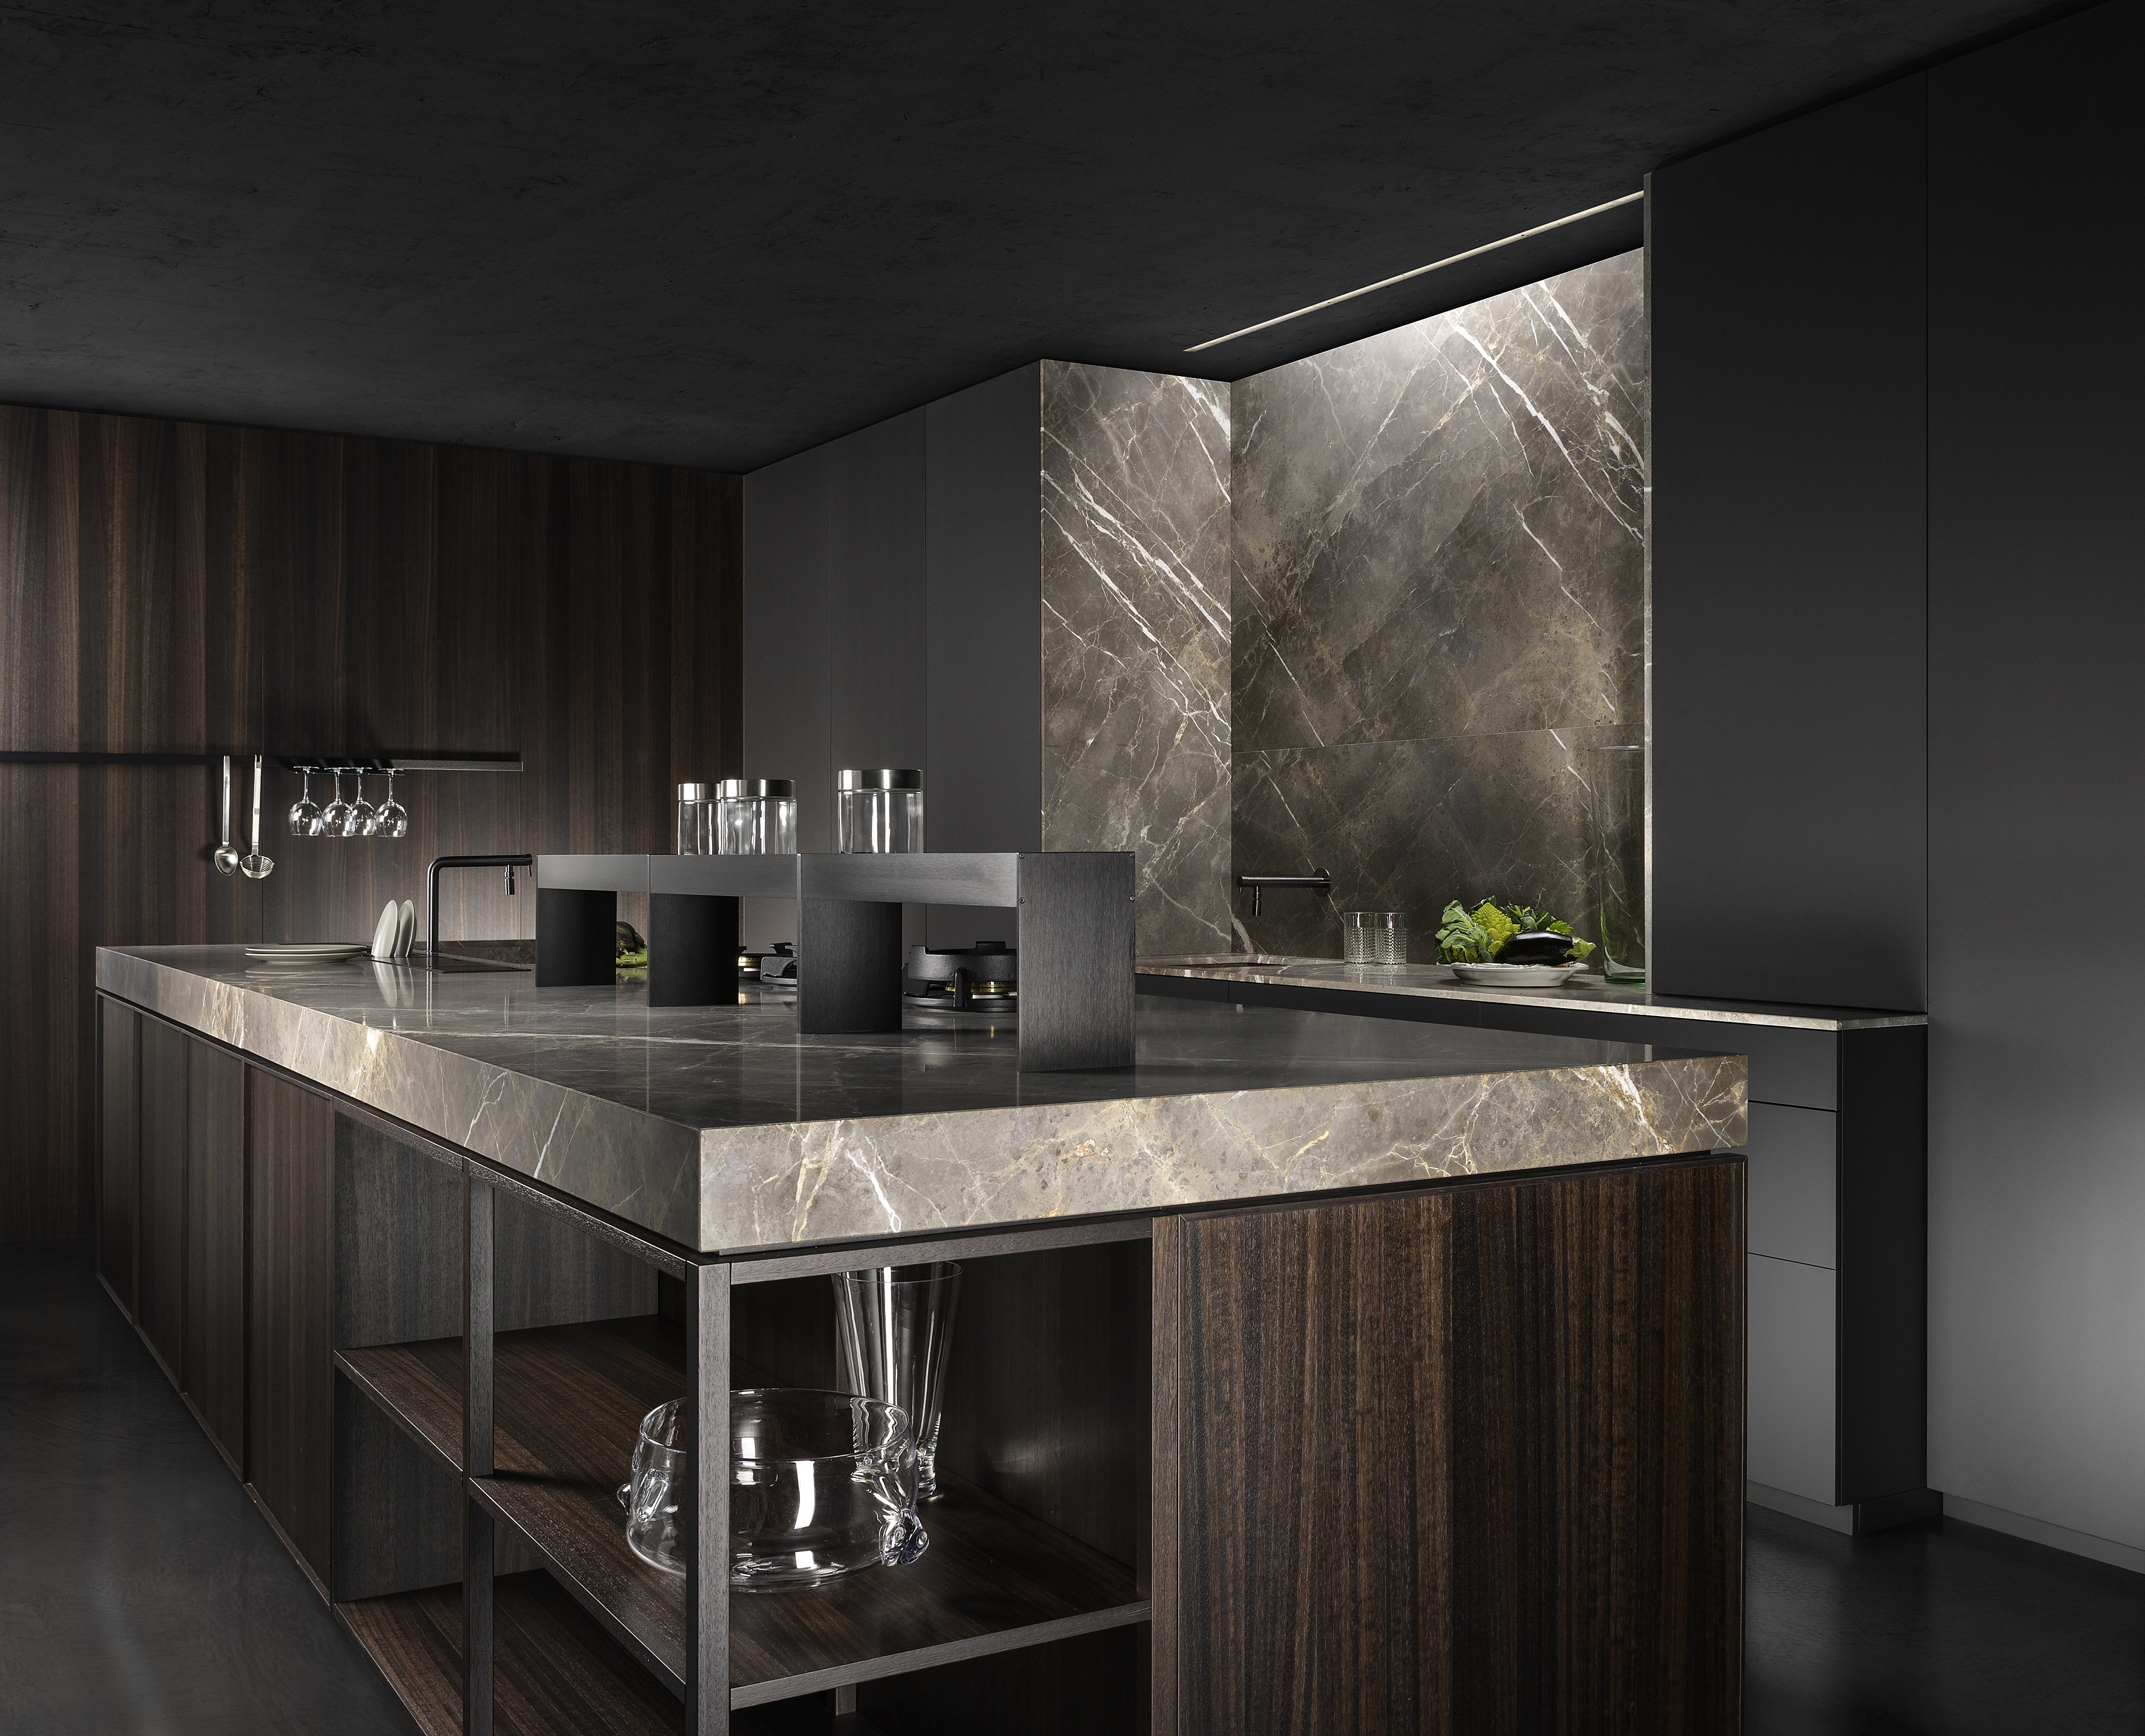 Designer Kitchens Made in Italy: introducing our new entry “Kuadra”